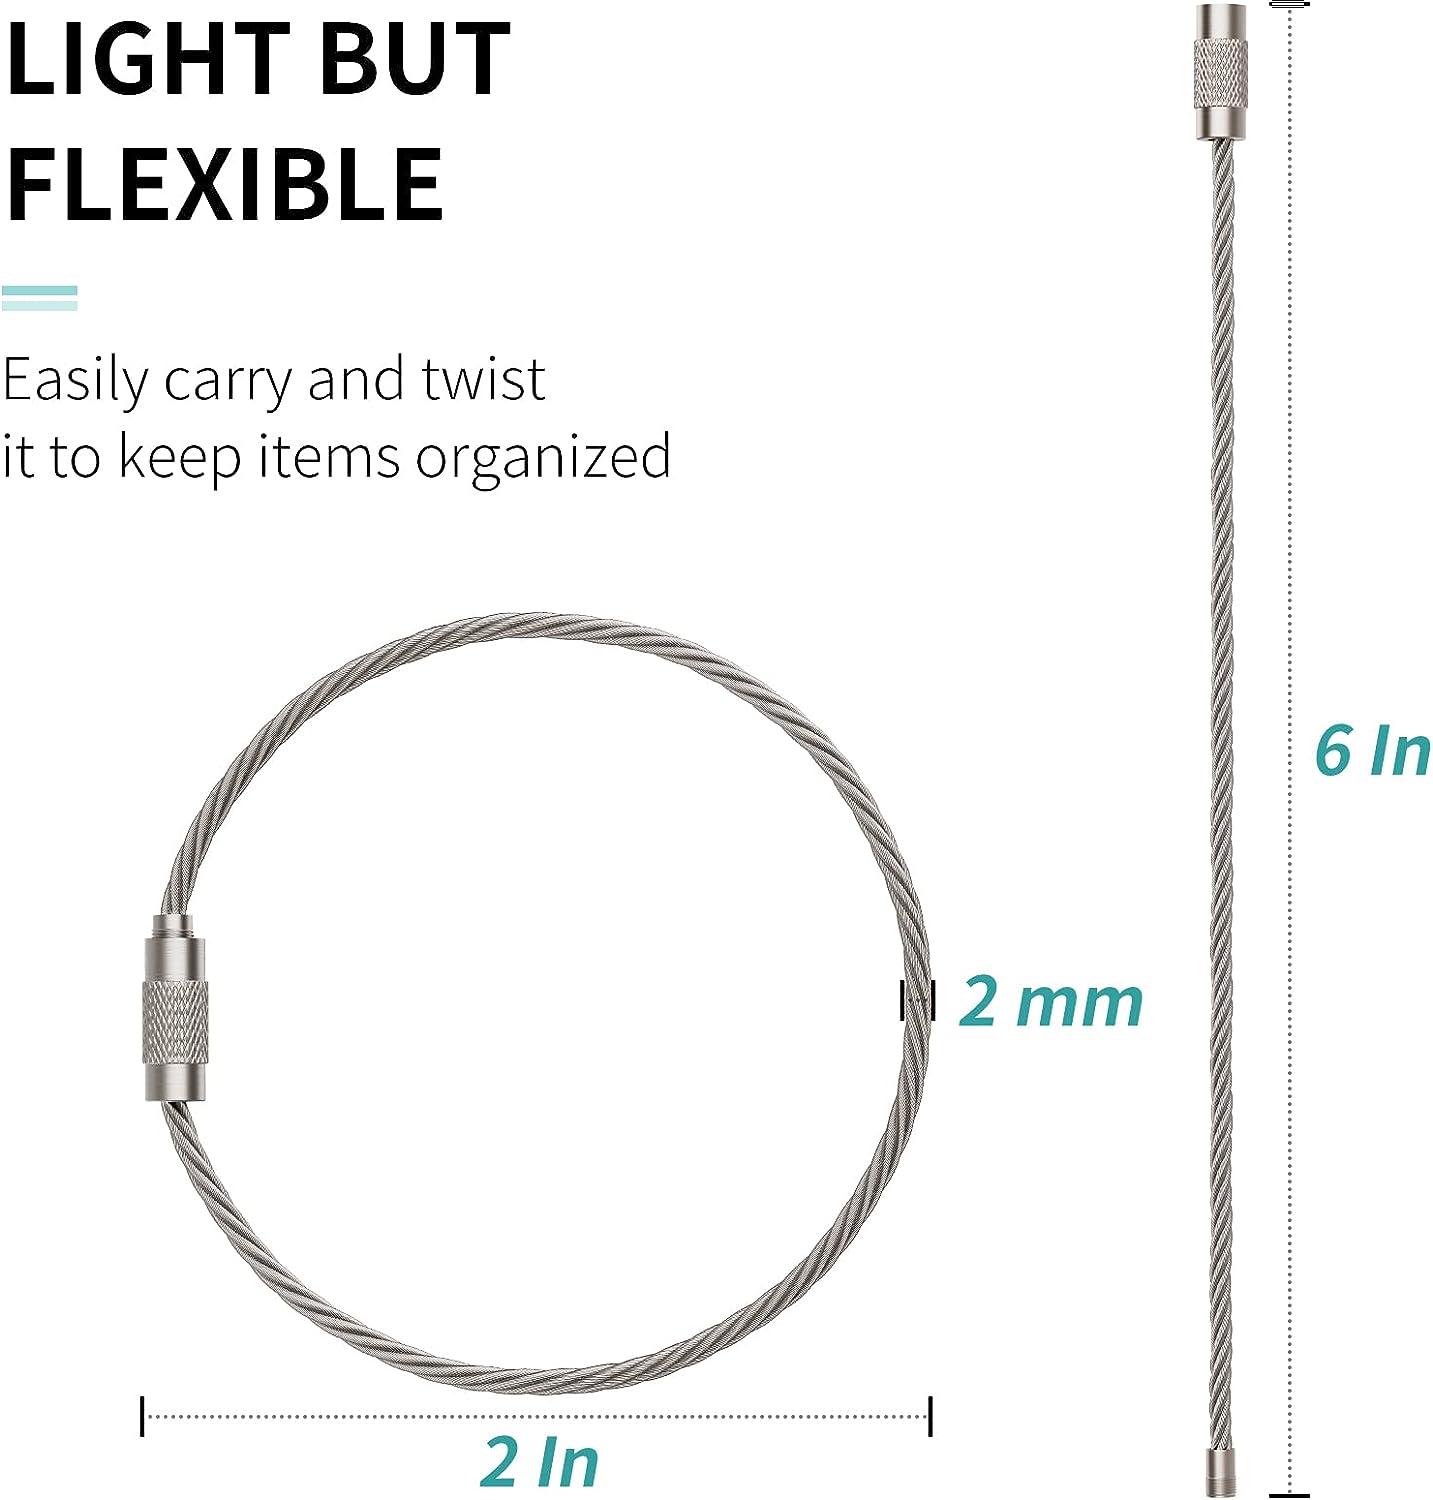 Shop for and Buy XL Twisty - 7 Inch Length Twist Lock Flexible Coated Cable Key  Ring at Keyring.com. Large selection and bulk discounts available.